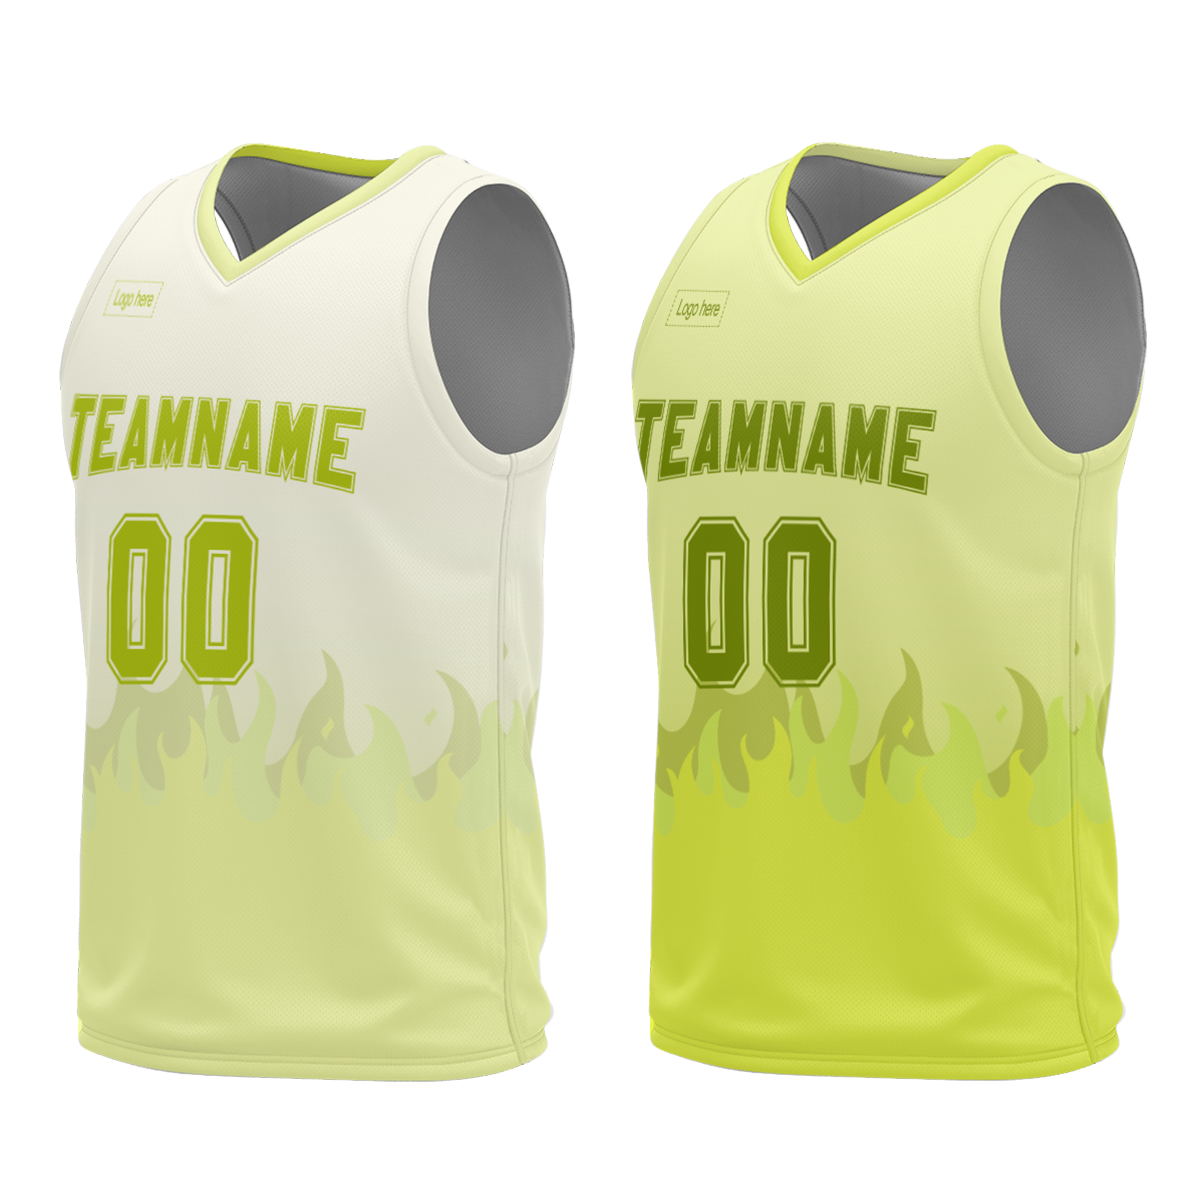 customized-with-personalized-logo-and-printing-basketball-team-name-reversible-basketball-jerseys-at-cj-pod-5